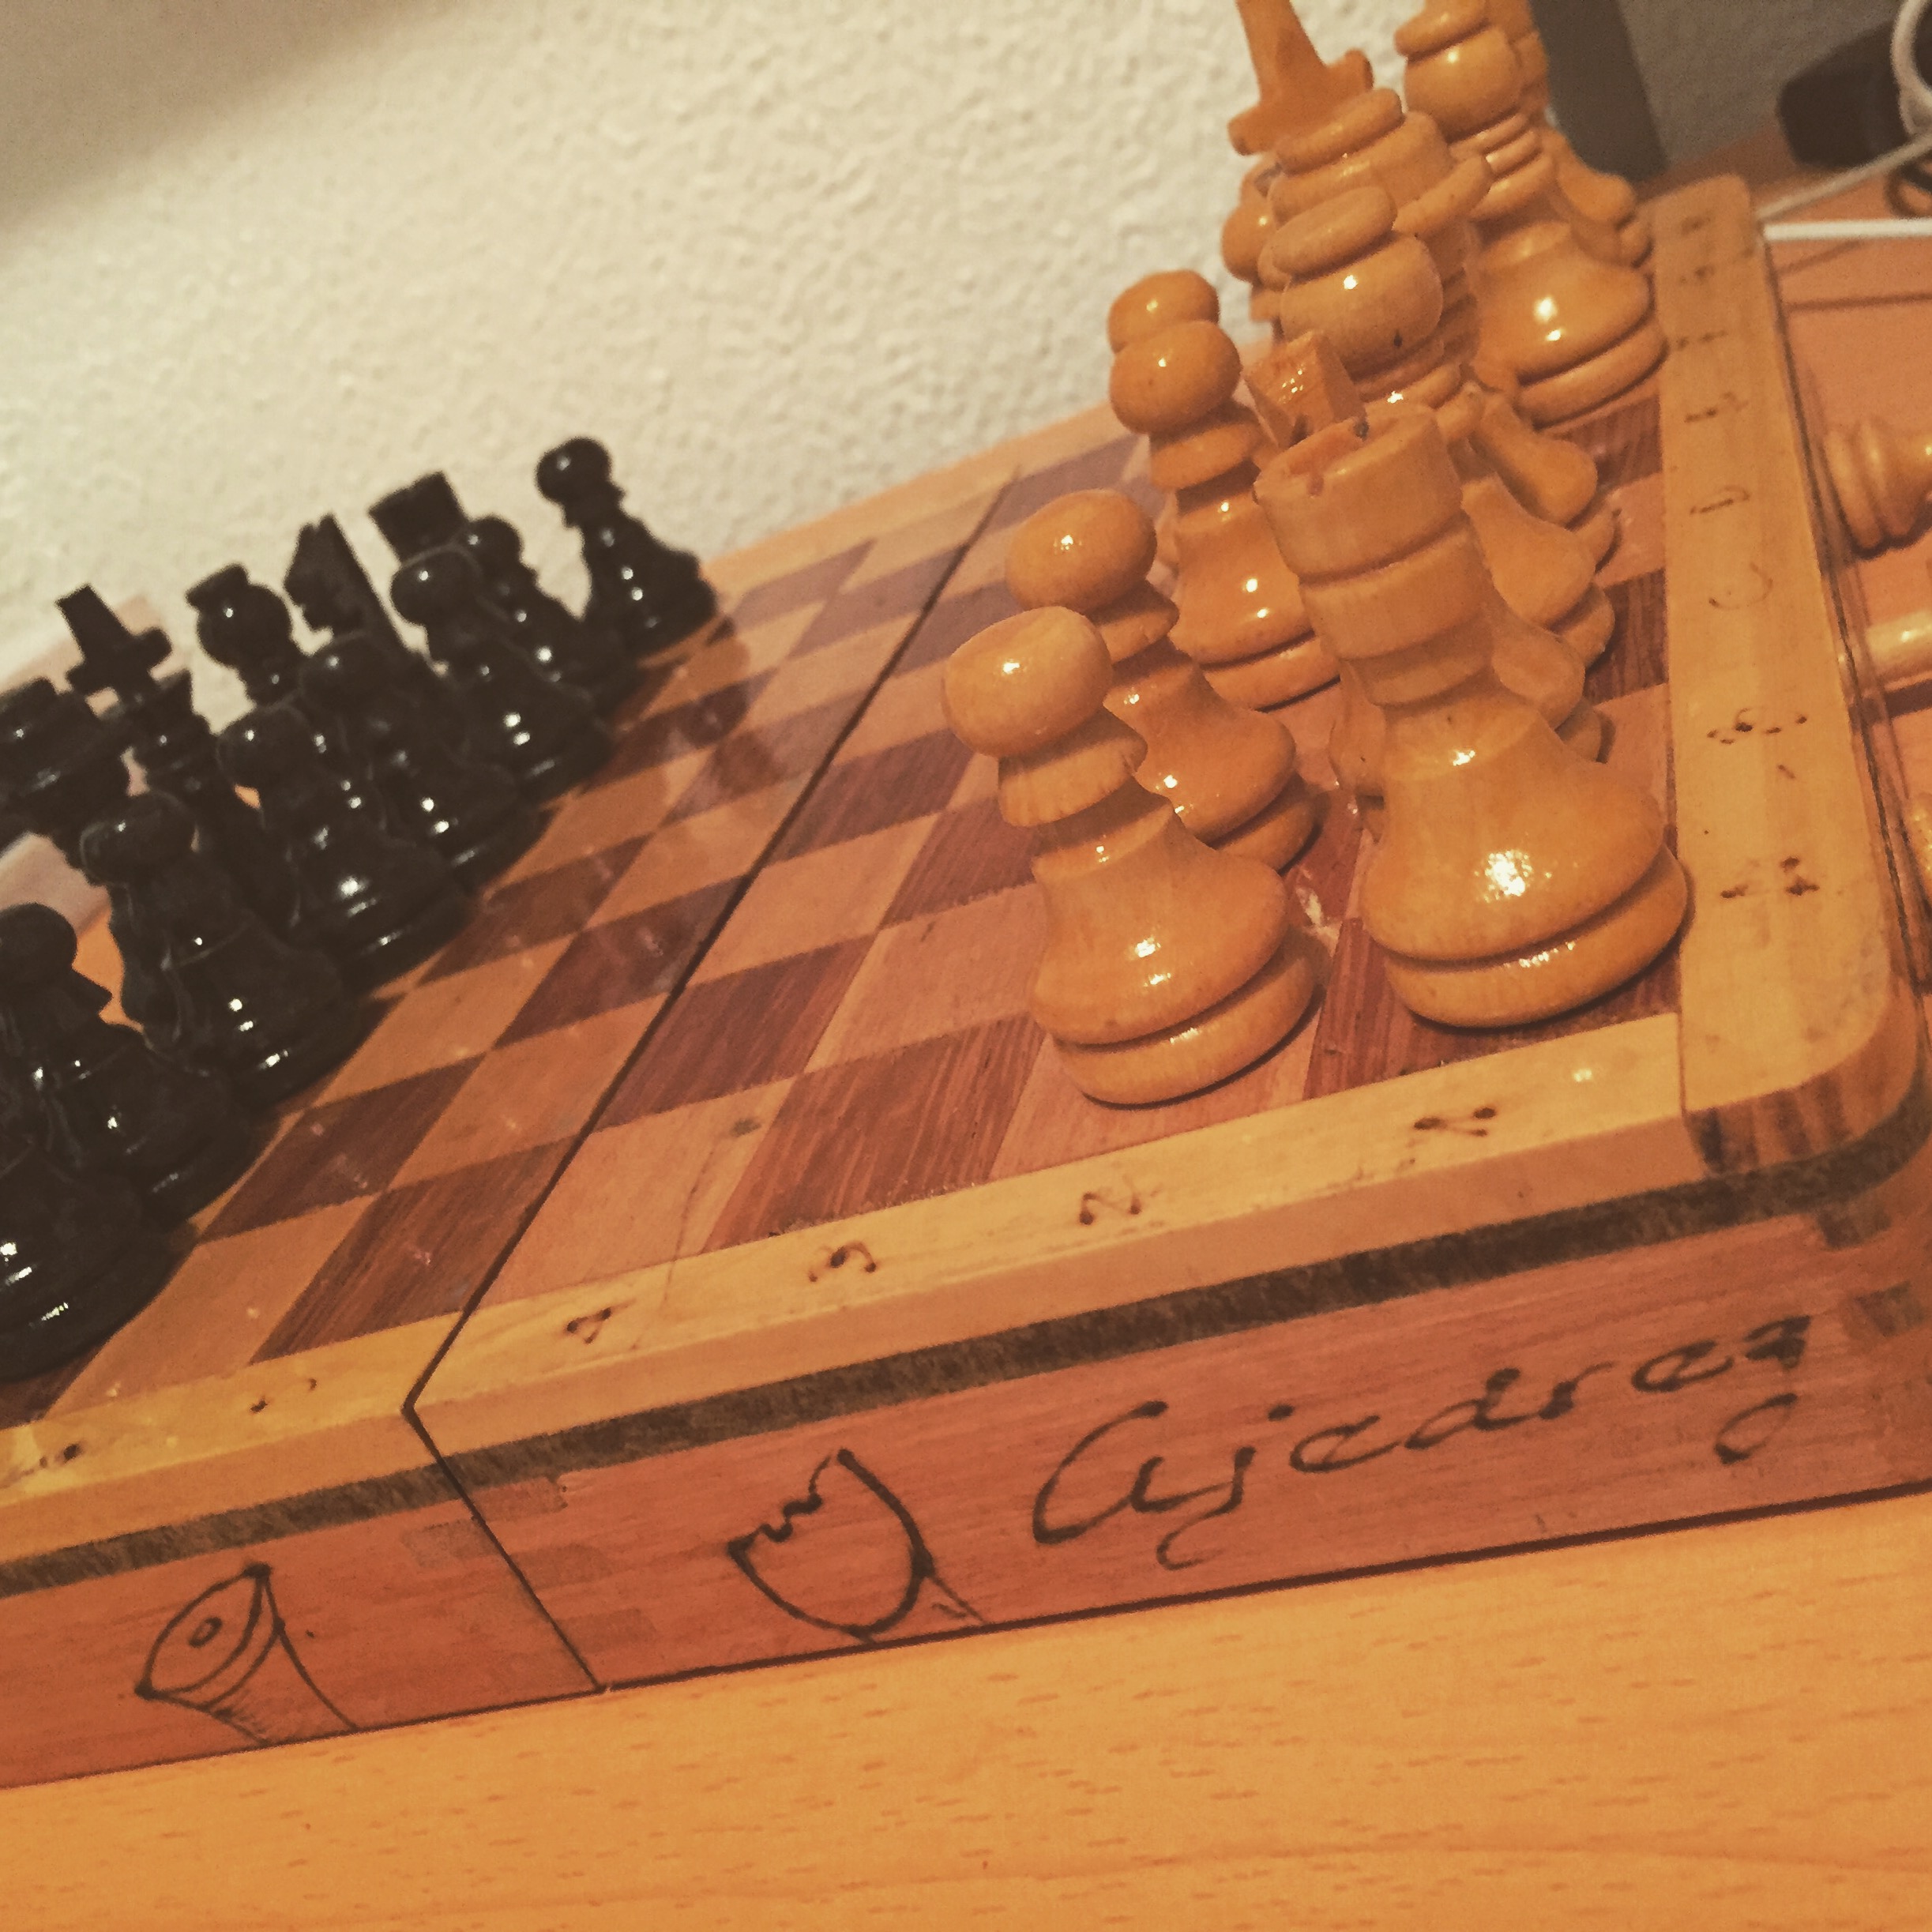 My classmate Mary was sweet enough to give me my very own chess set. It was very unexpected. This is my first chess set, and I'm so in love!